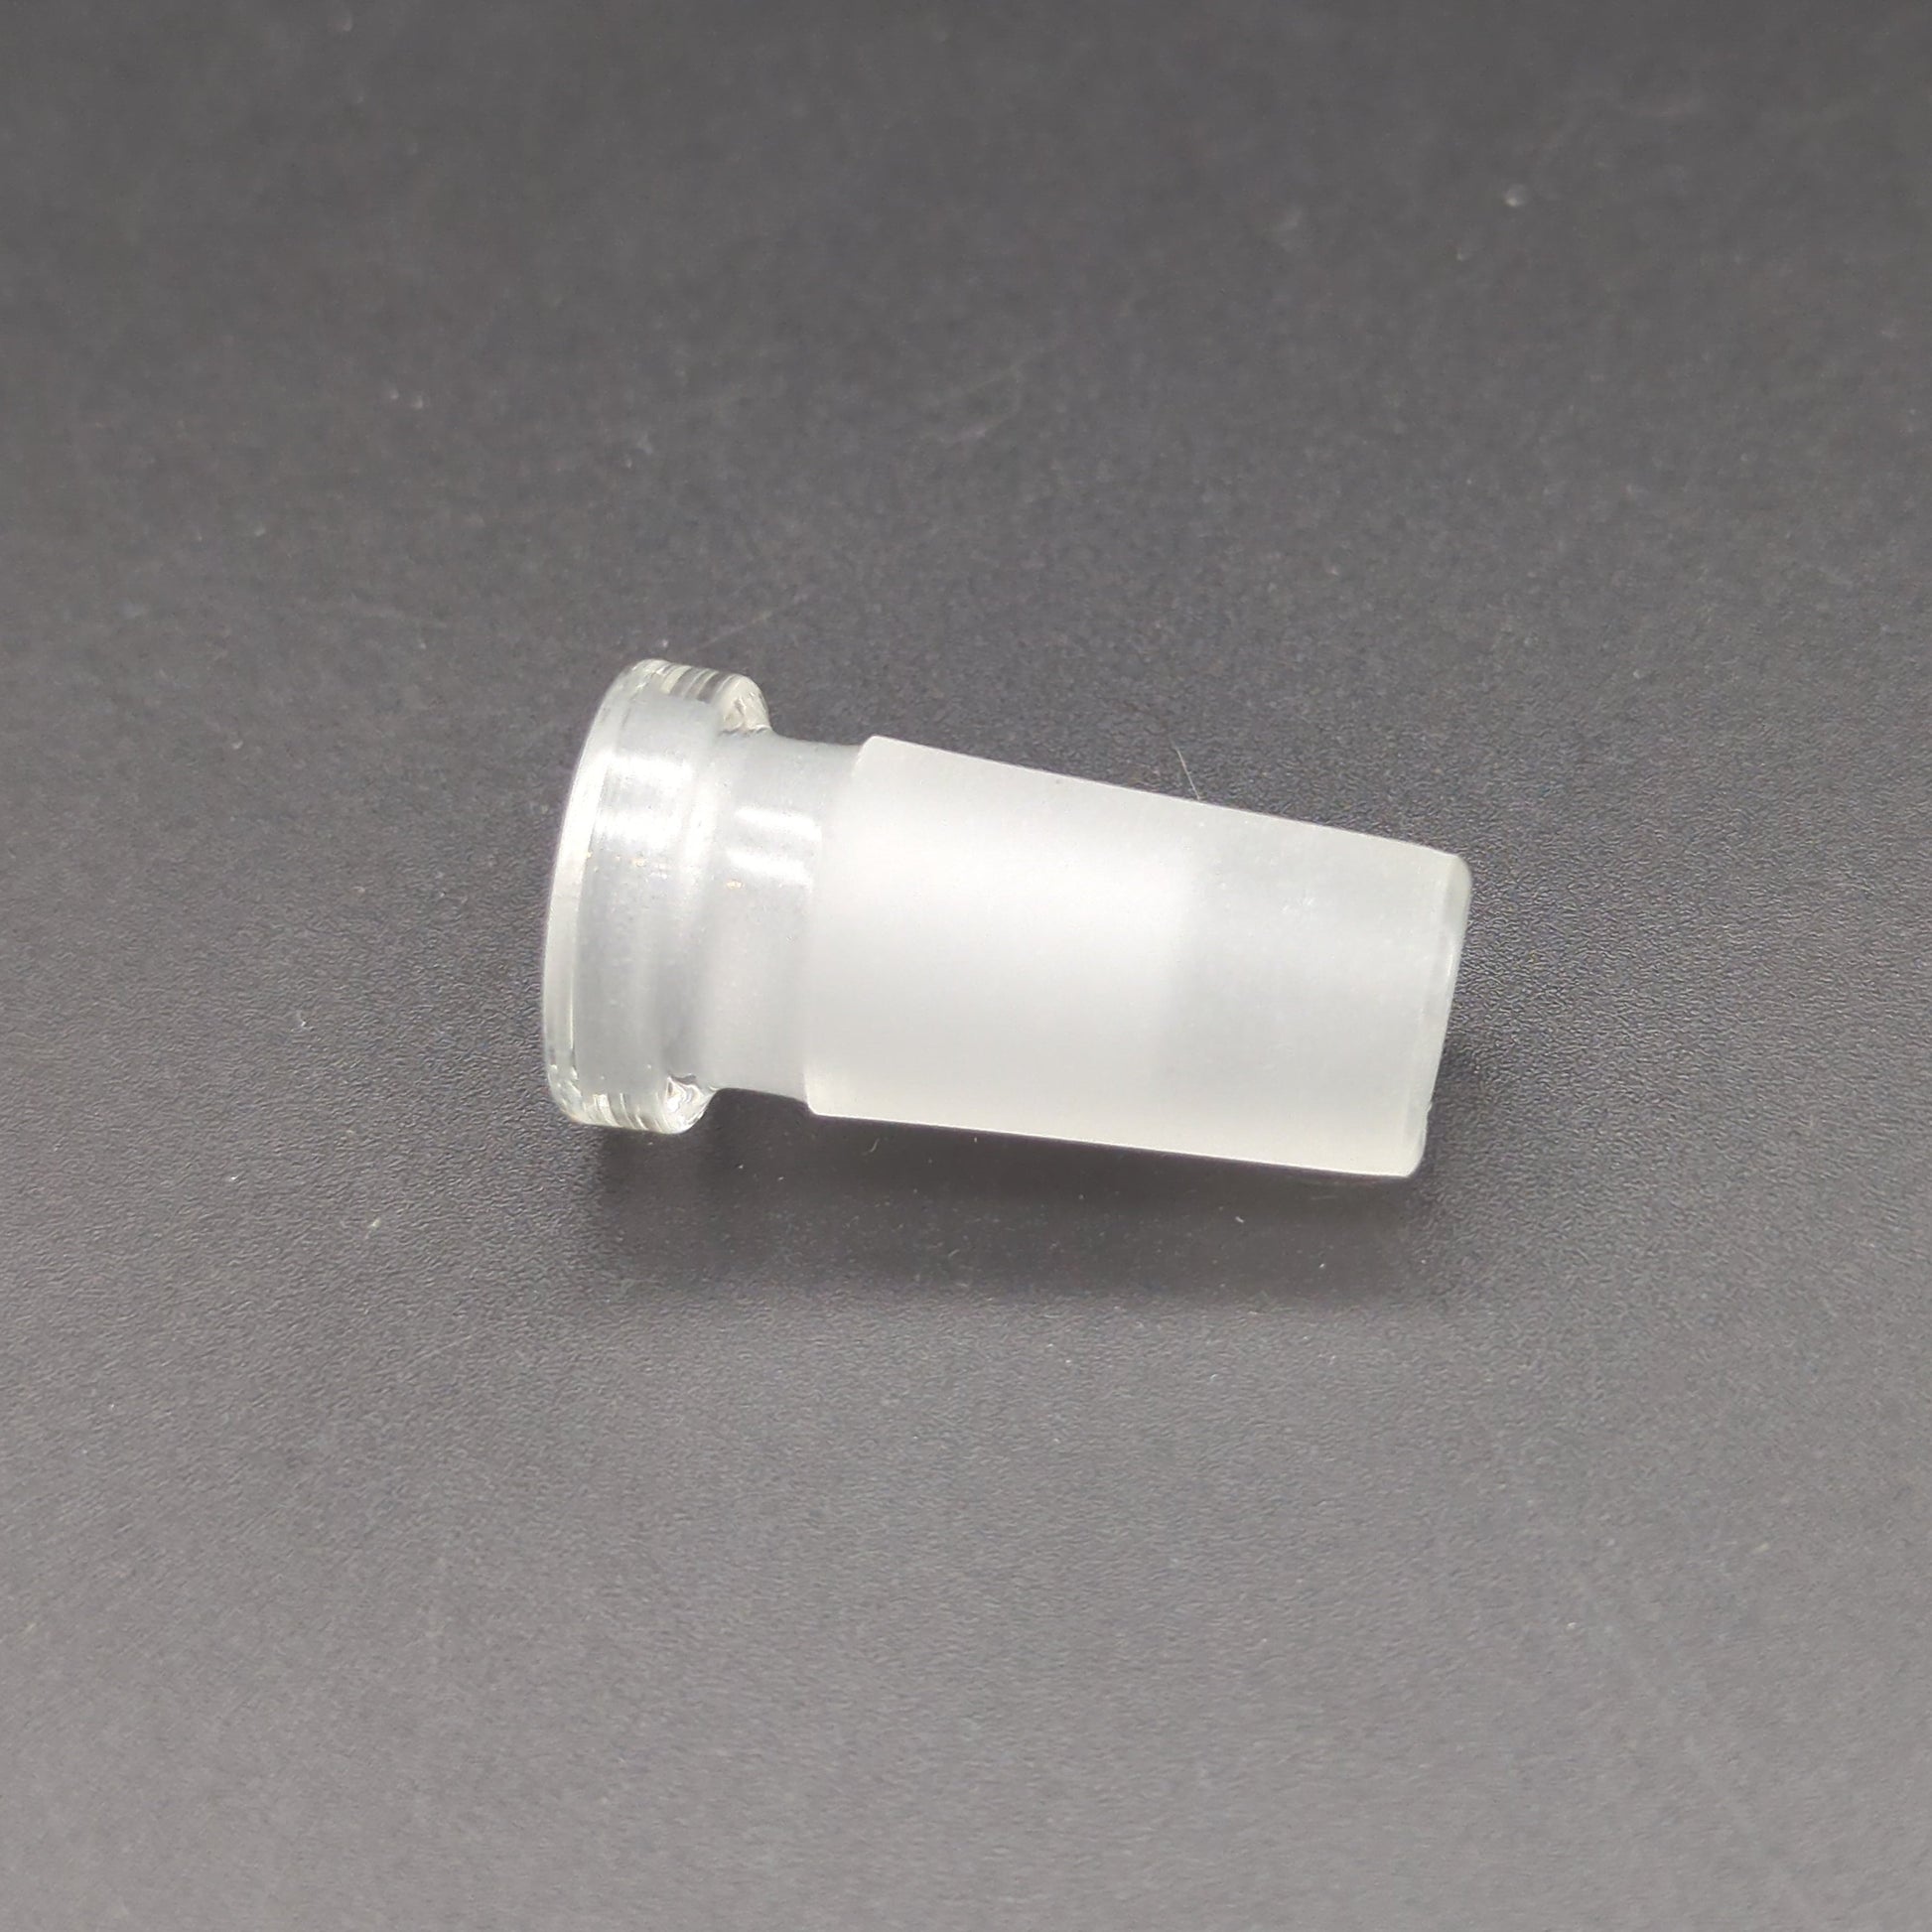 Joint Adapter - 14mm Male to 10mm Female laying down